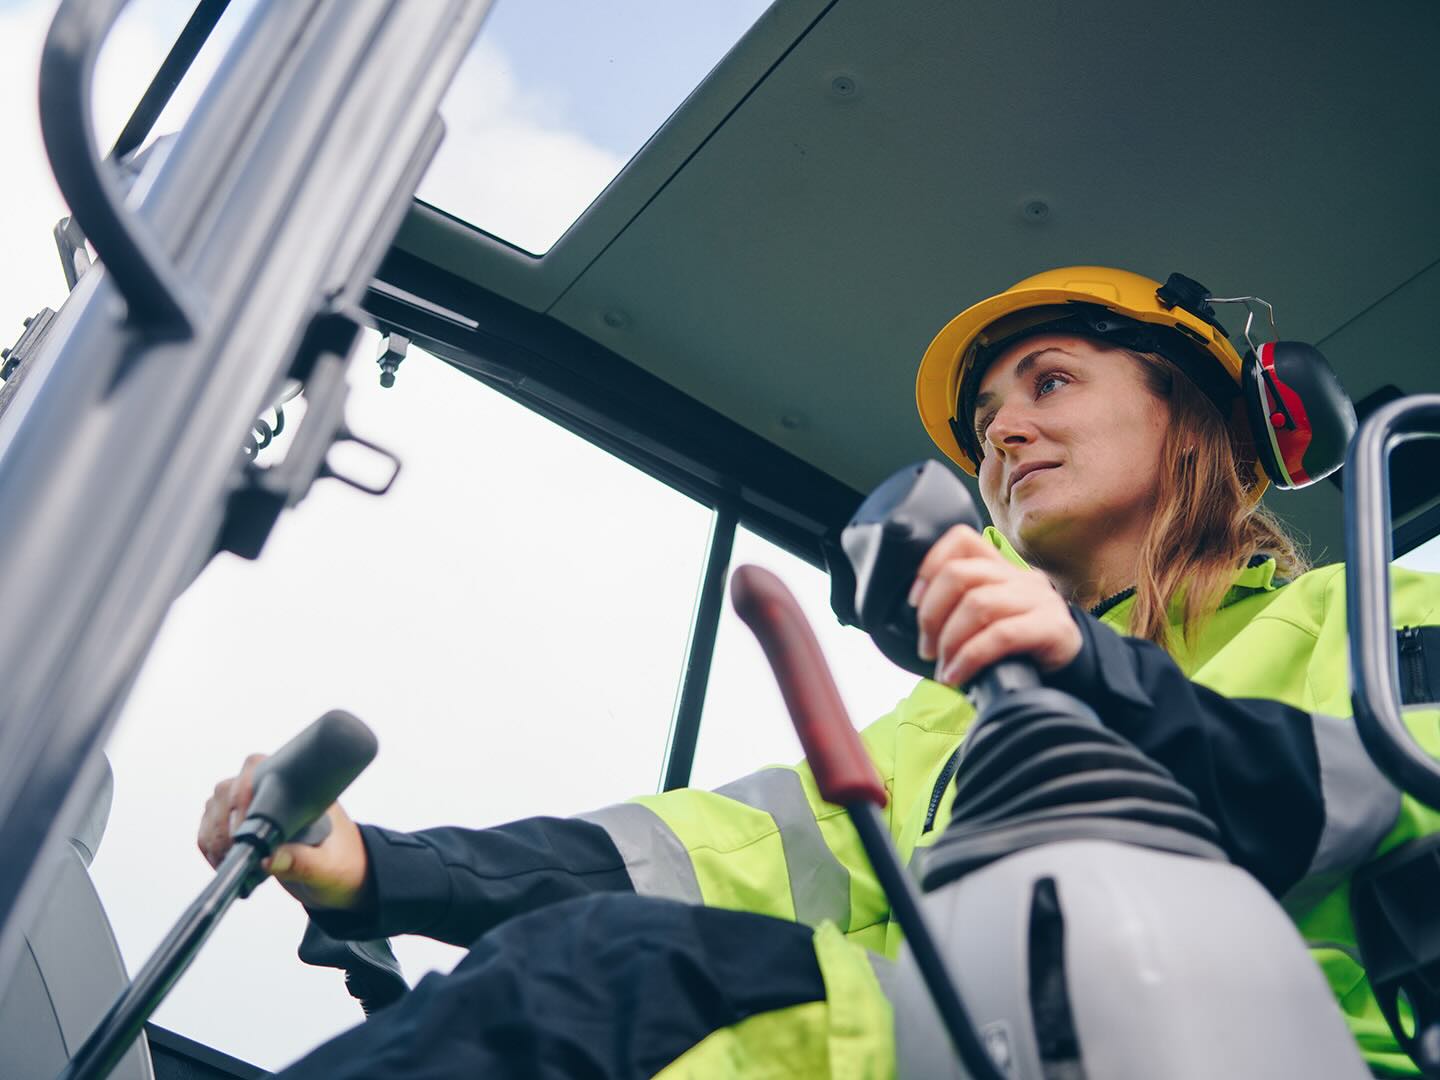 How To Become A Construction Equipment Operator